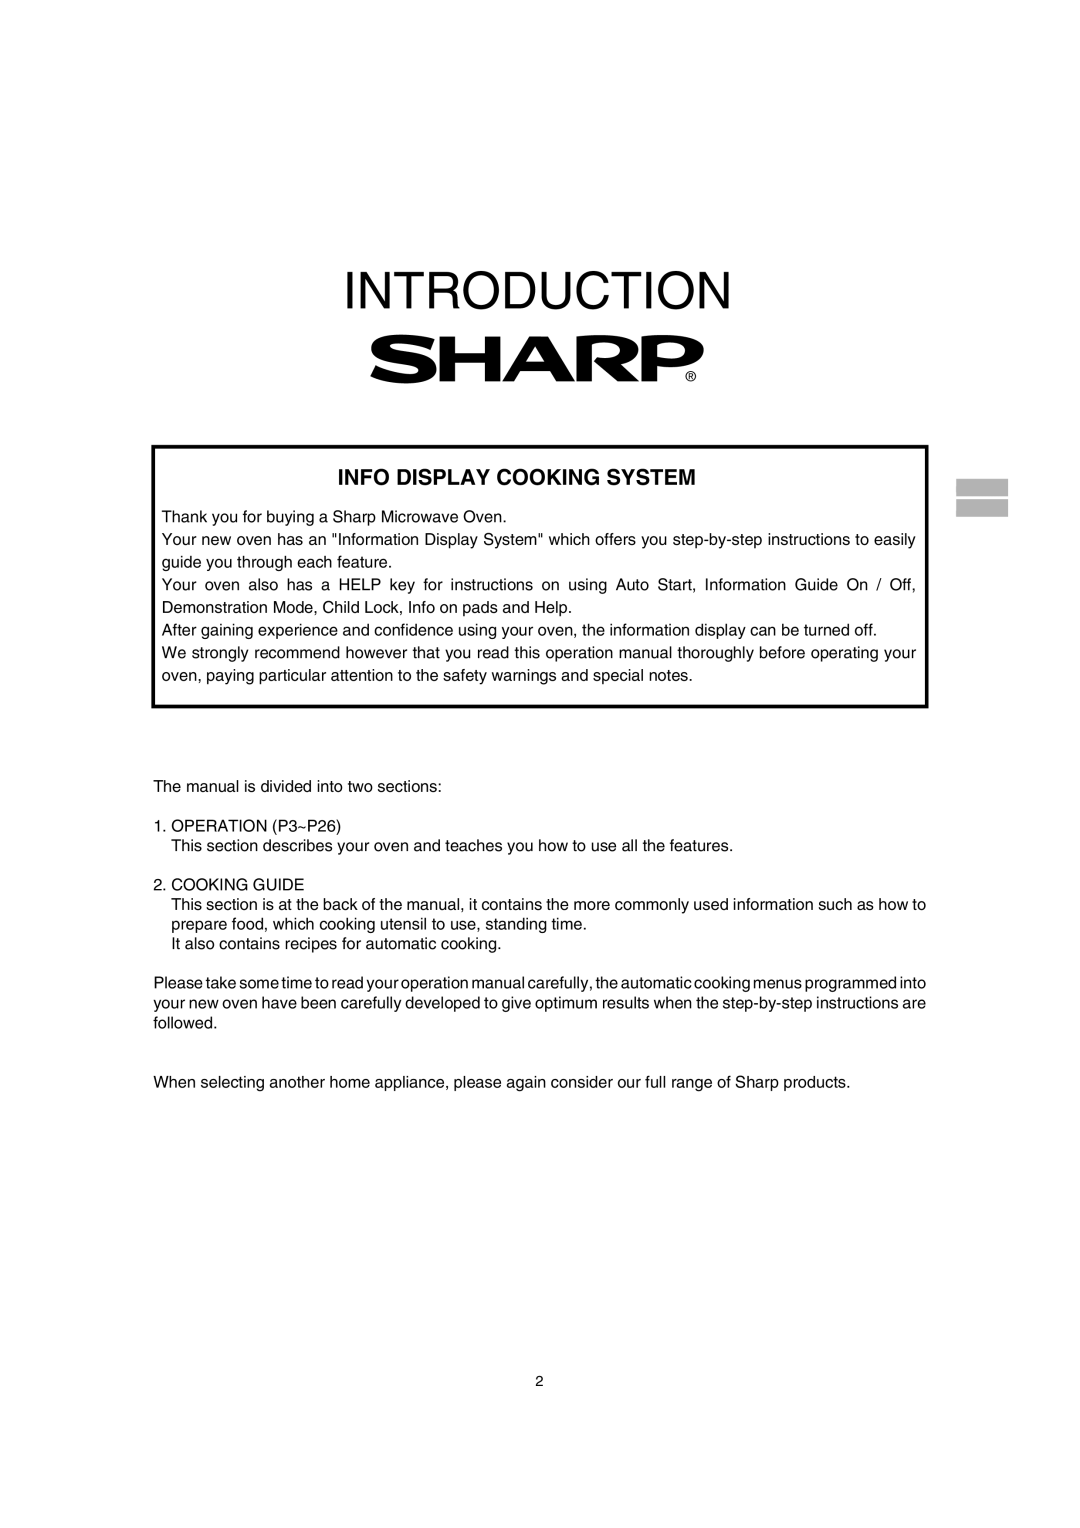 Sharp R-990J(S), R-990K(S)/(W), R-980J operation manual Info Display Cooking System, Introduction 